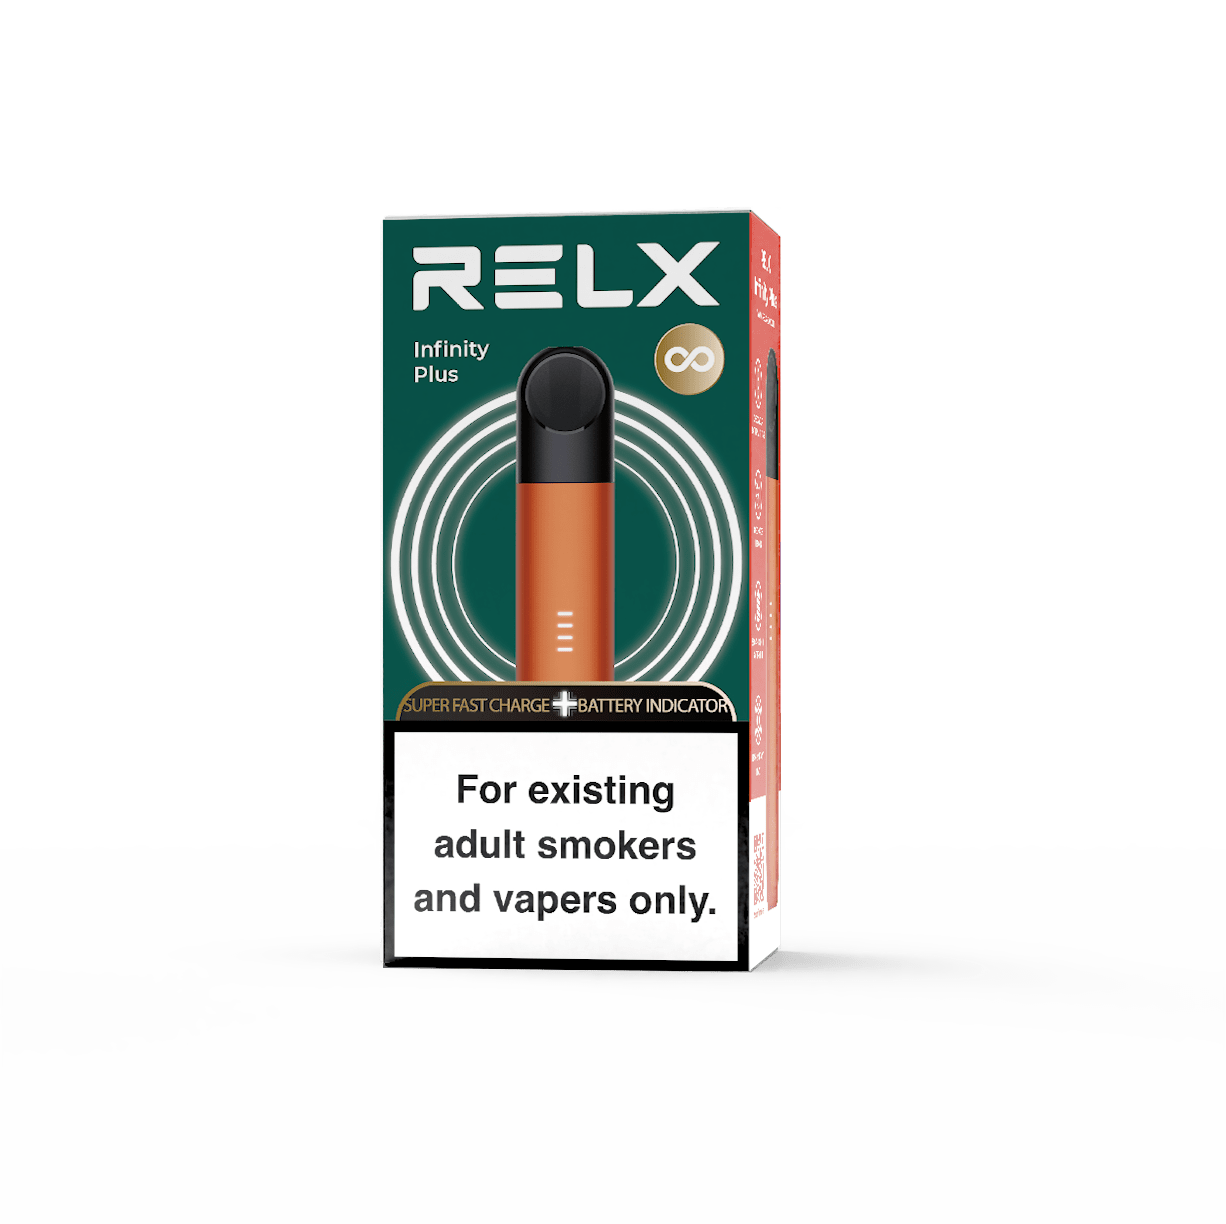 RELX Official｜Infinity Plus Vape Device